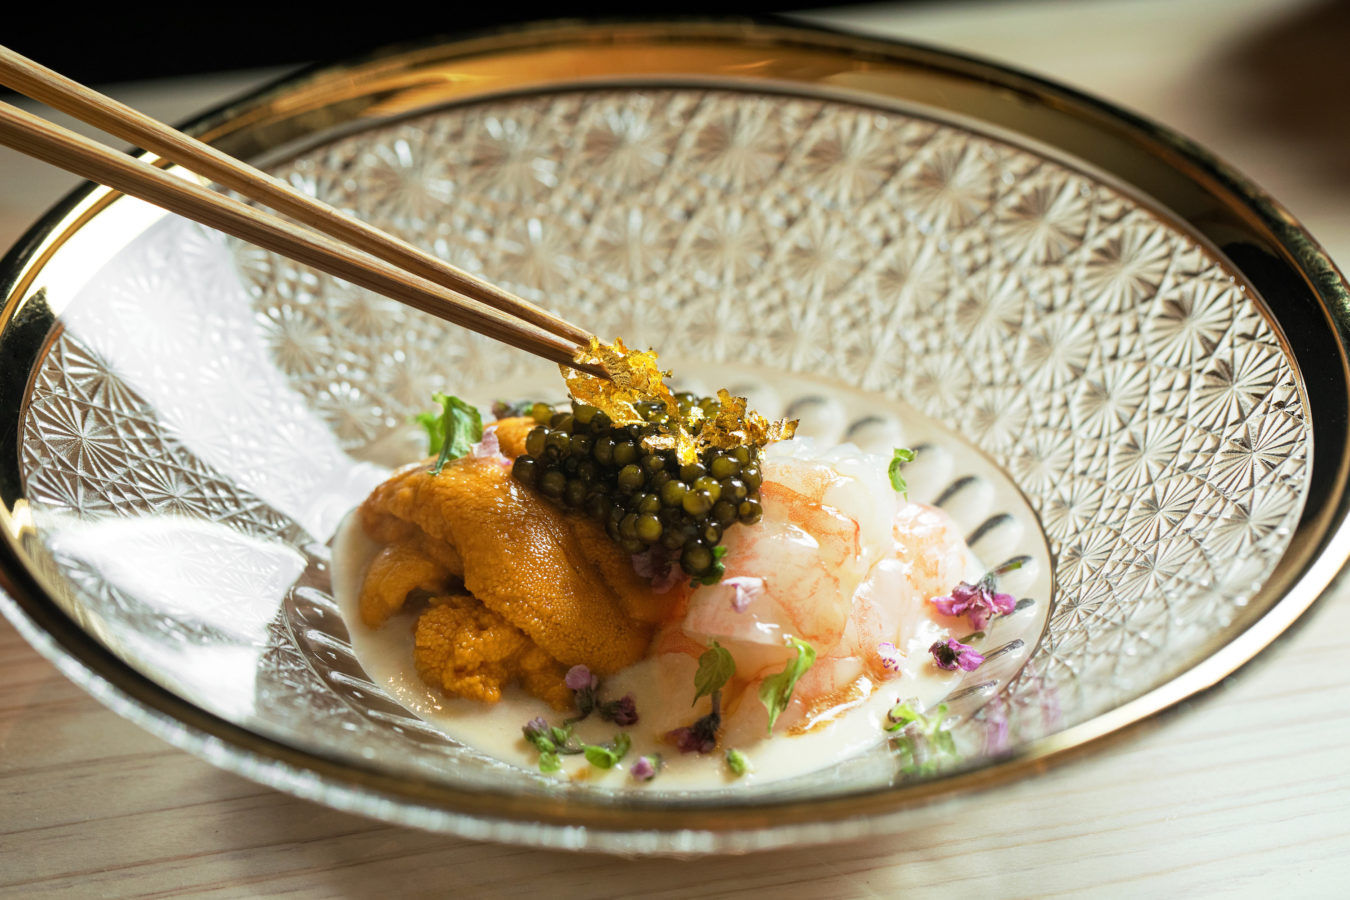 Have your omakase two ways at the new Jinhonten and revamped Sushi Ichizuke